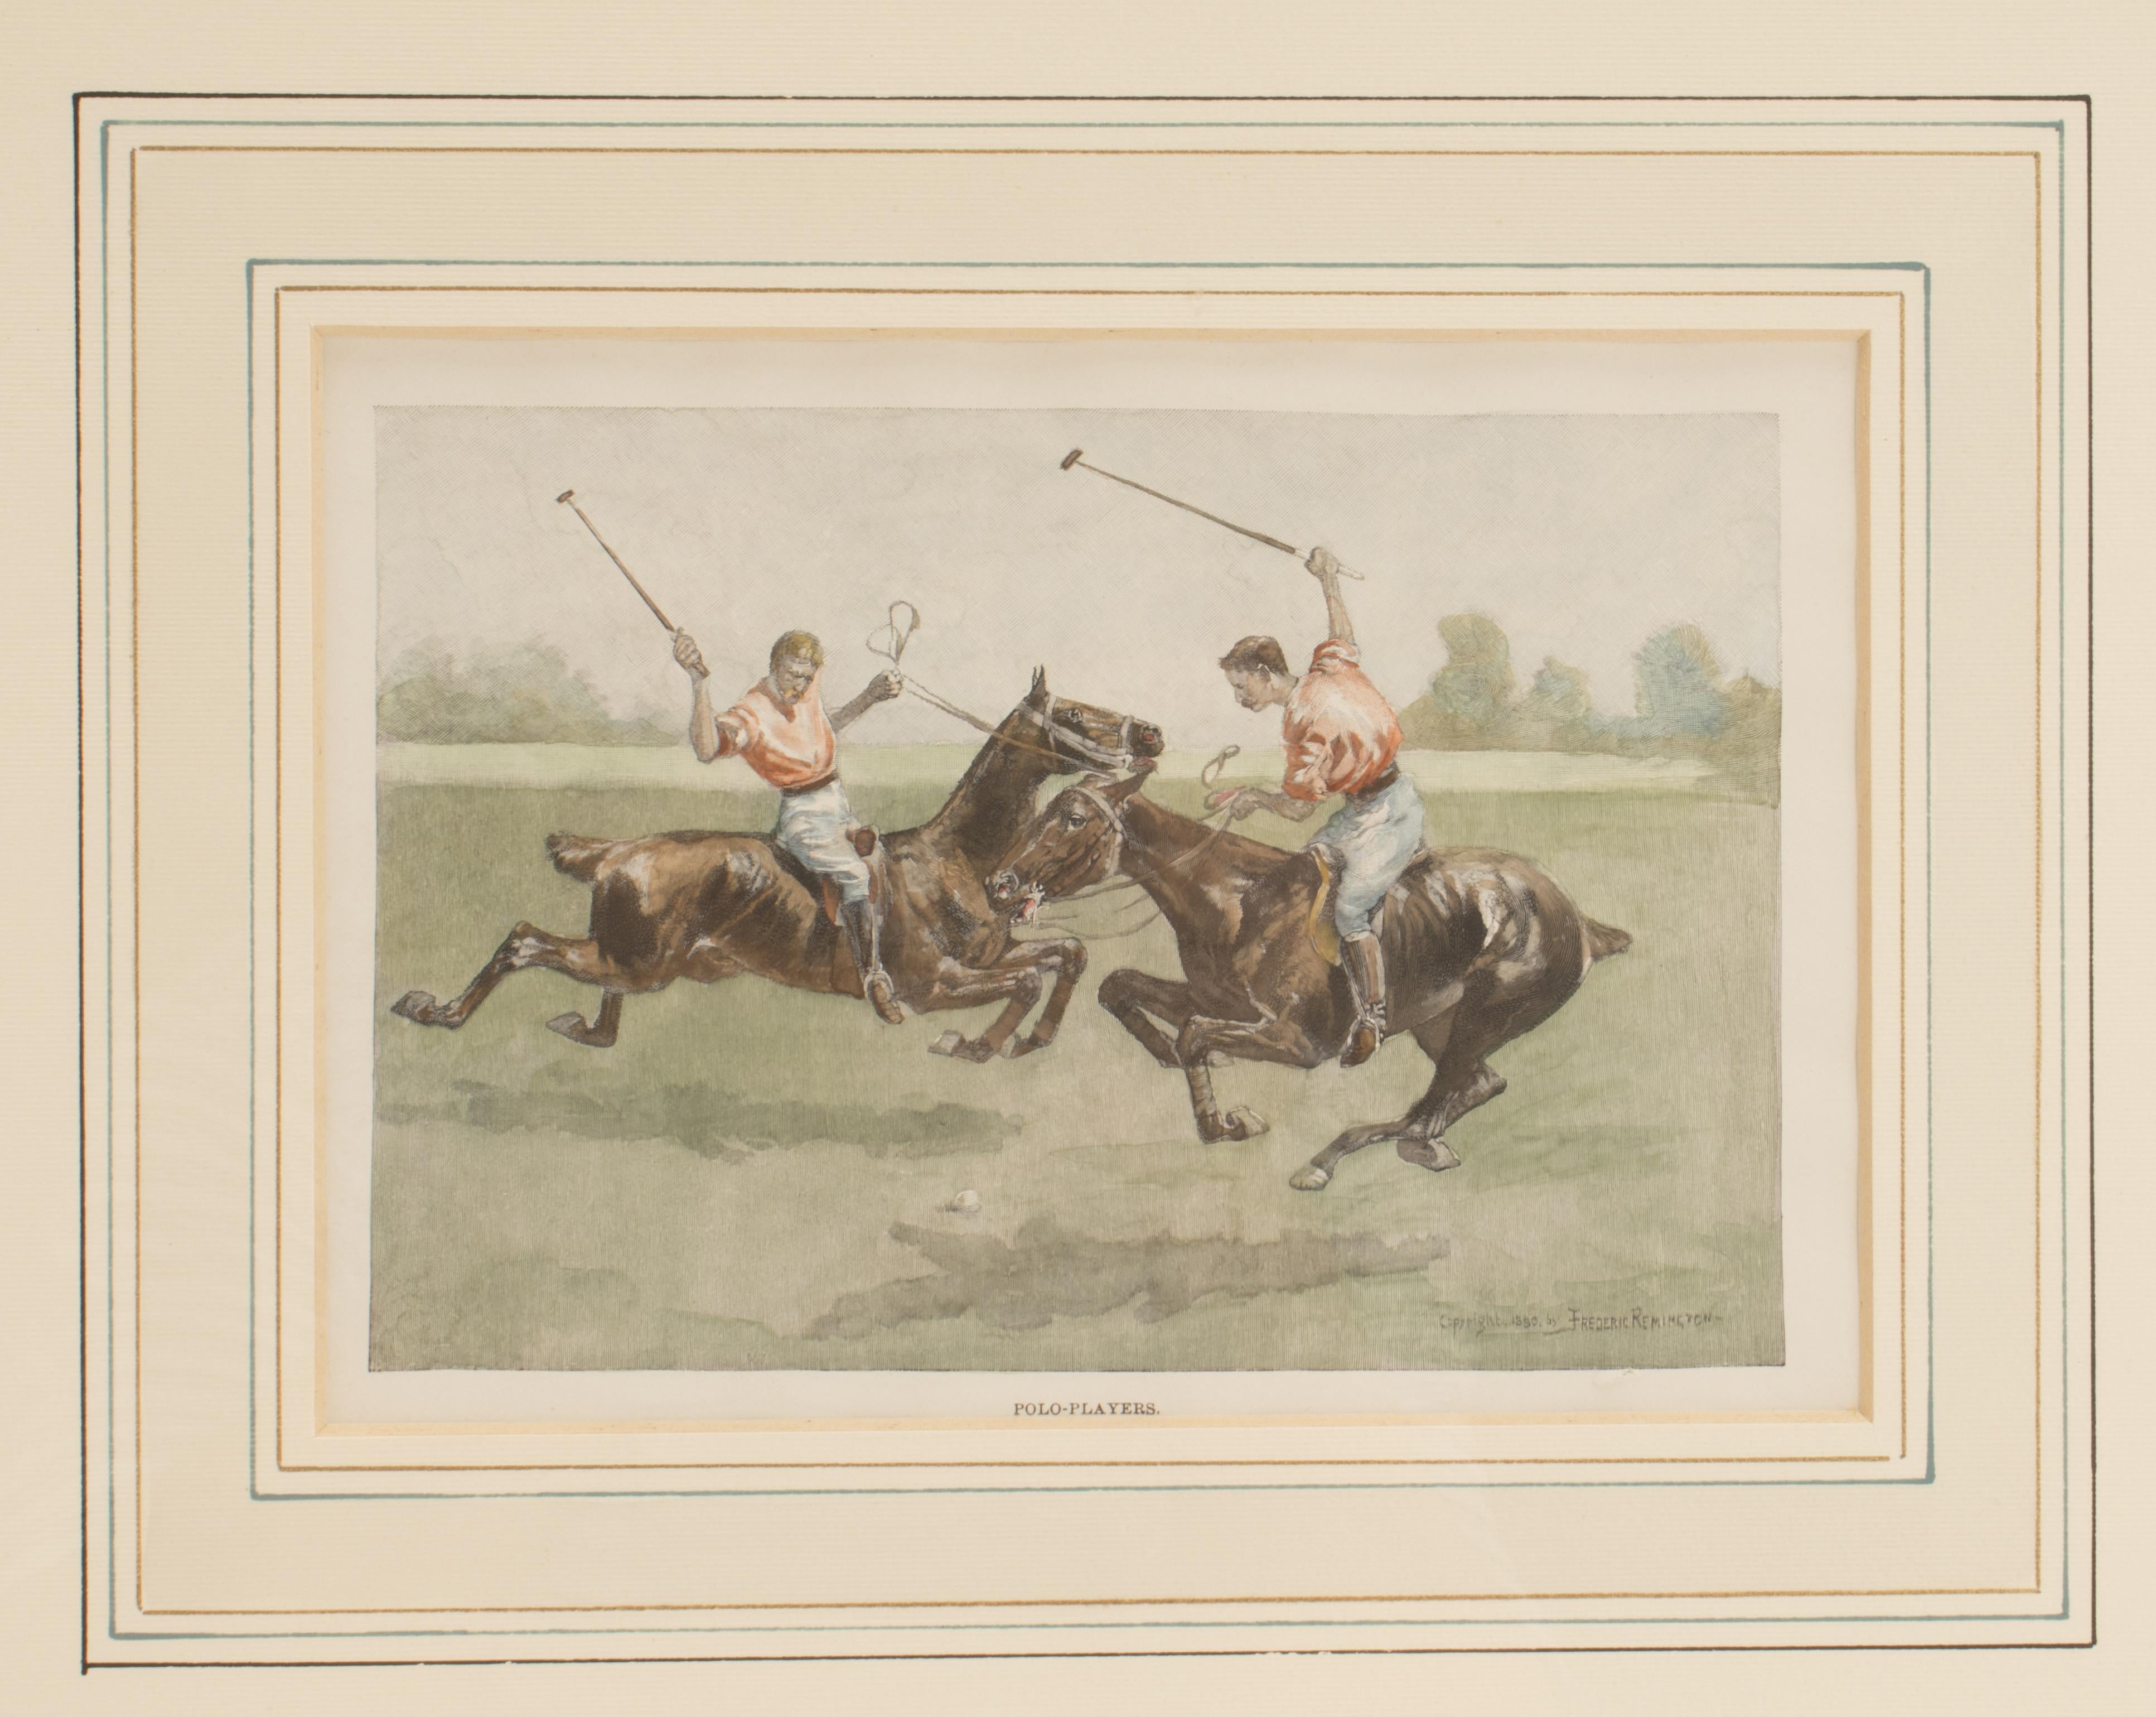 A watercolor finished print, depicting polo players. Frederic Remington. Solid cherry wood frame, polished and beeswaxed. USA circa 1900.